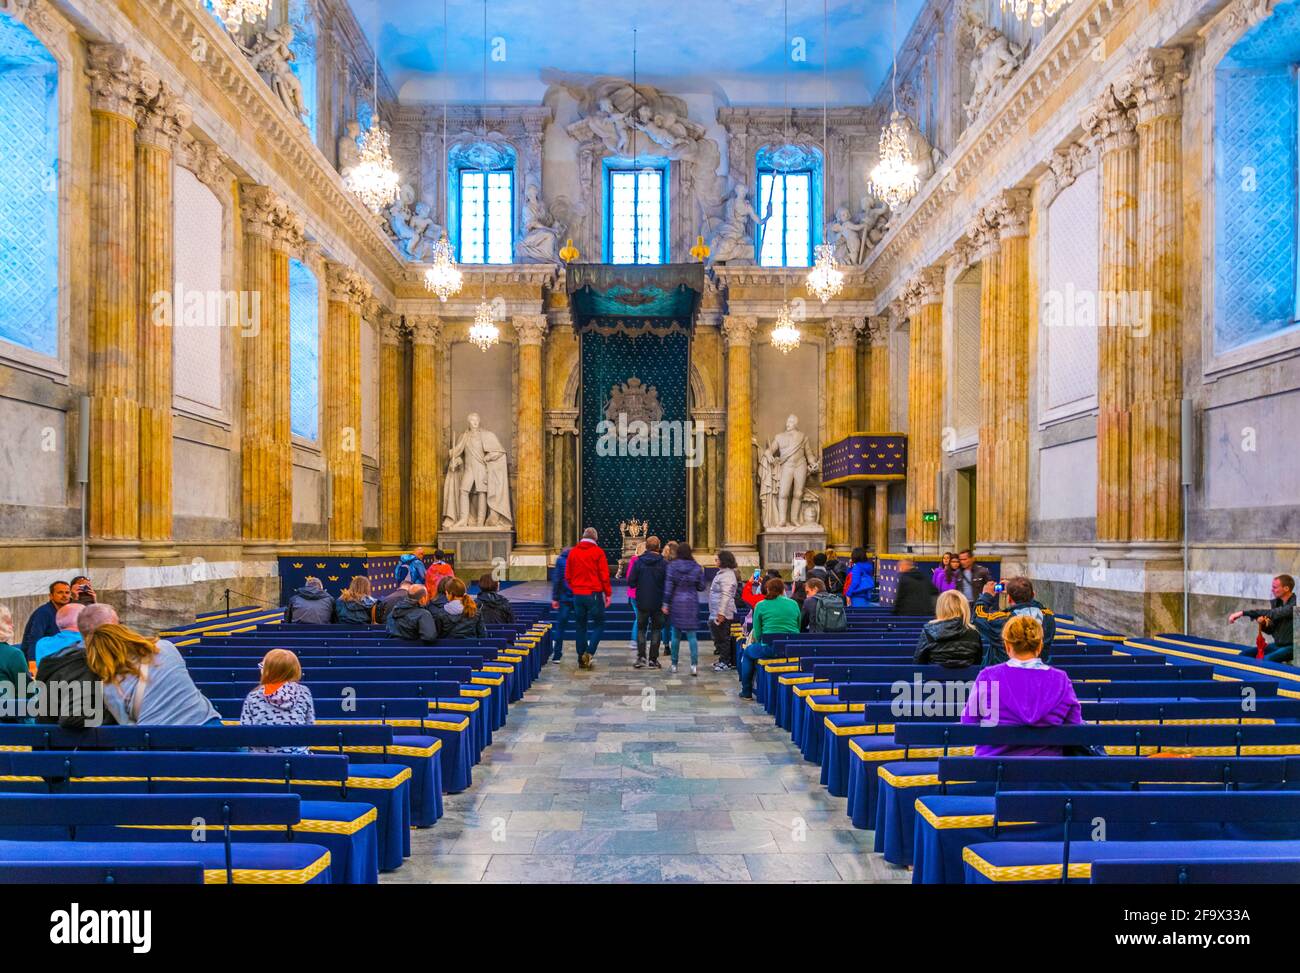 STOCKHOLM, SWEDEN, AUGUST 18, 2016:View of the throne hall of the Kungliga slottet castle in Gamla Stan, Stockholm, Sweden Stock Photo